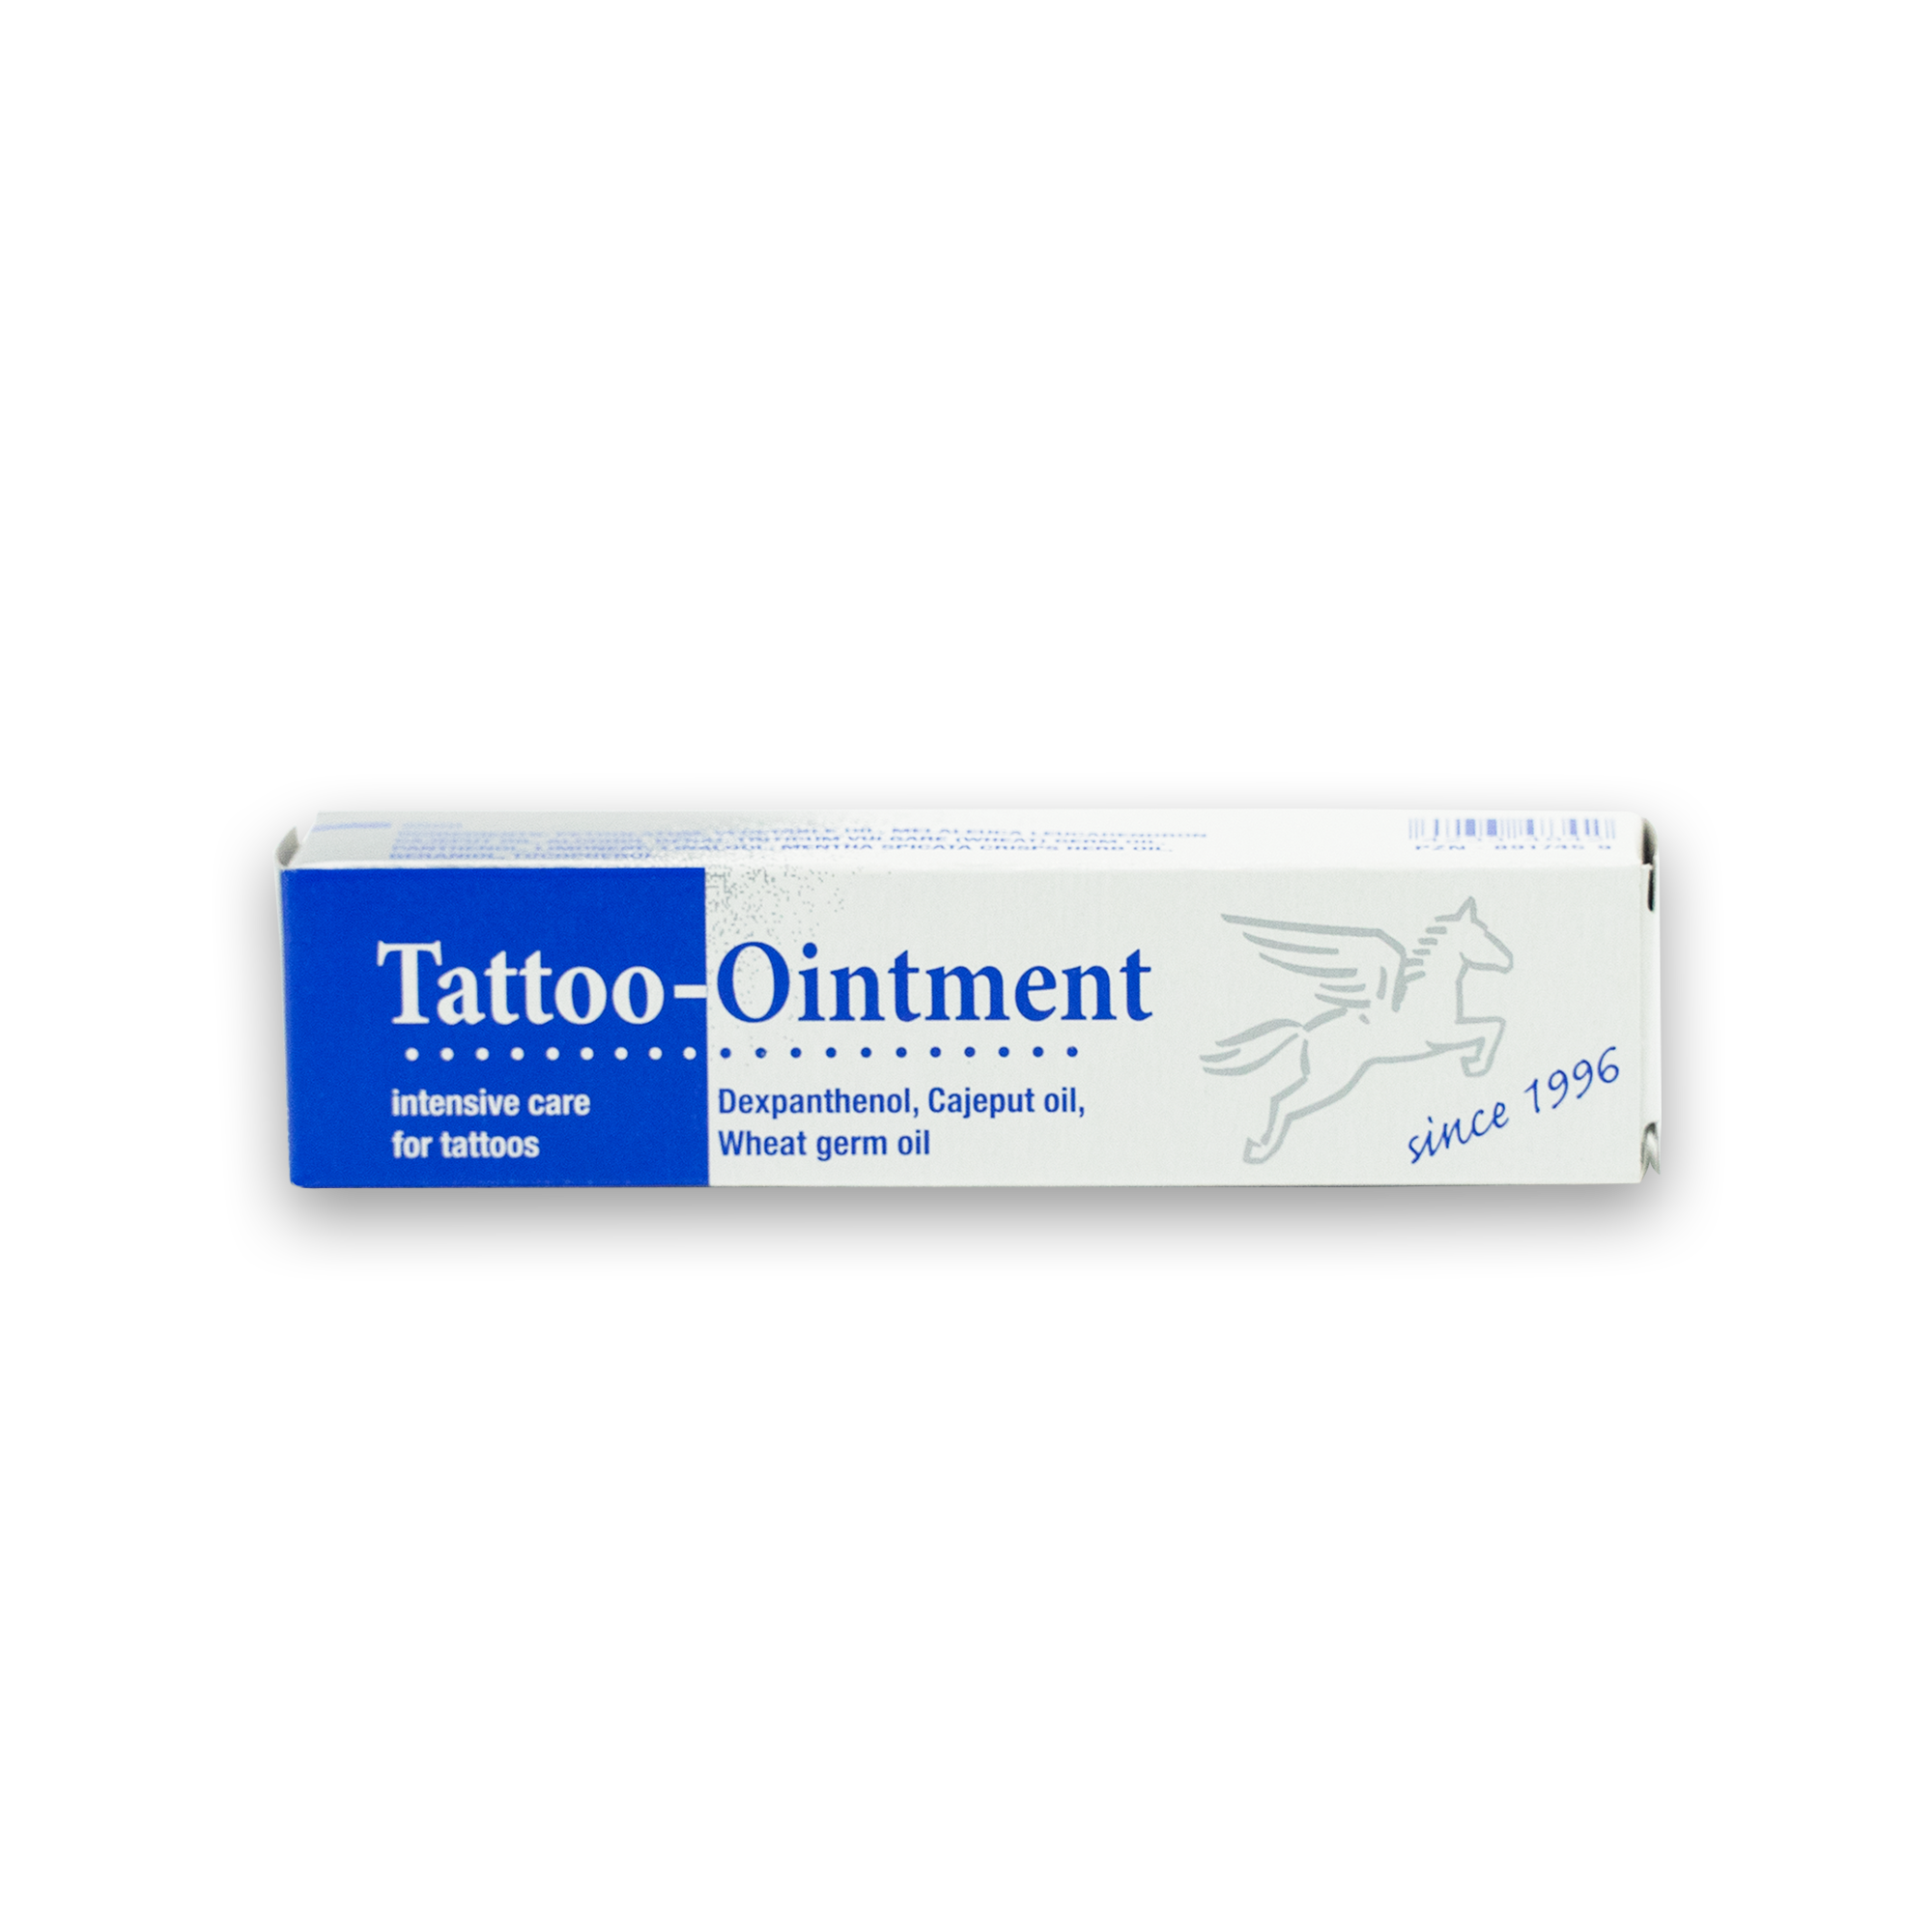 Is Tattoo Ointment Really Necessary? – INKEEZE